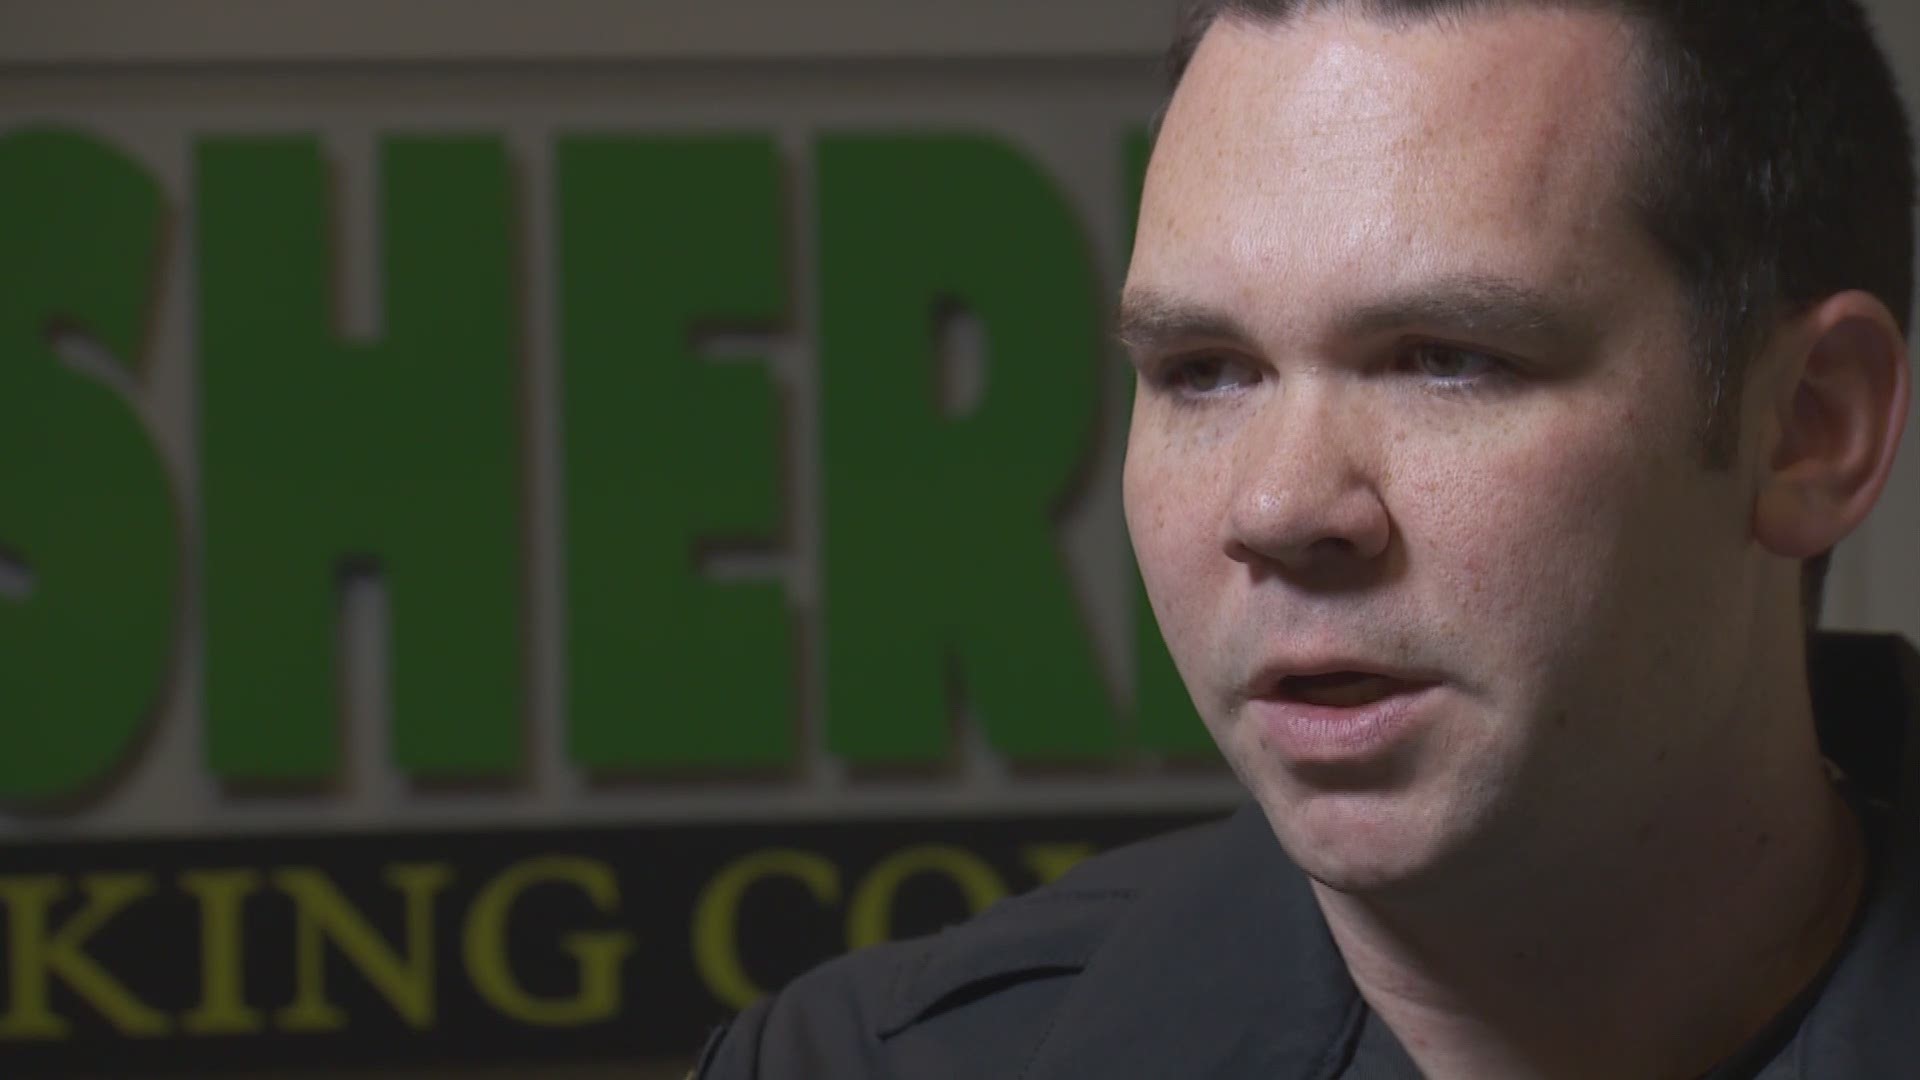 King County Sheriff’s Office spokesperson Sgt. Ryan Abbott explains an investigation into a King County Metro employee who is accused of raping a teenage girl and coercing her to engage in prostitution.